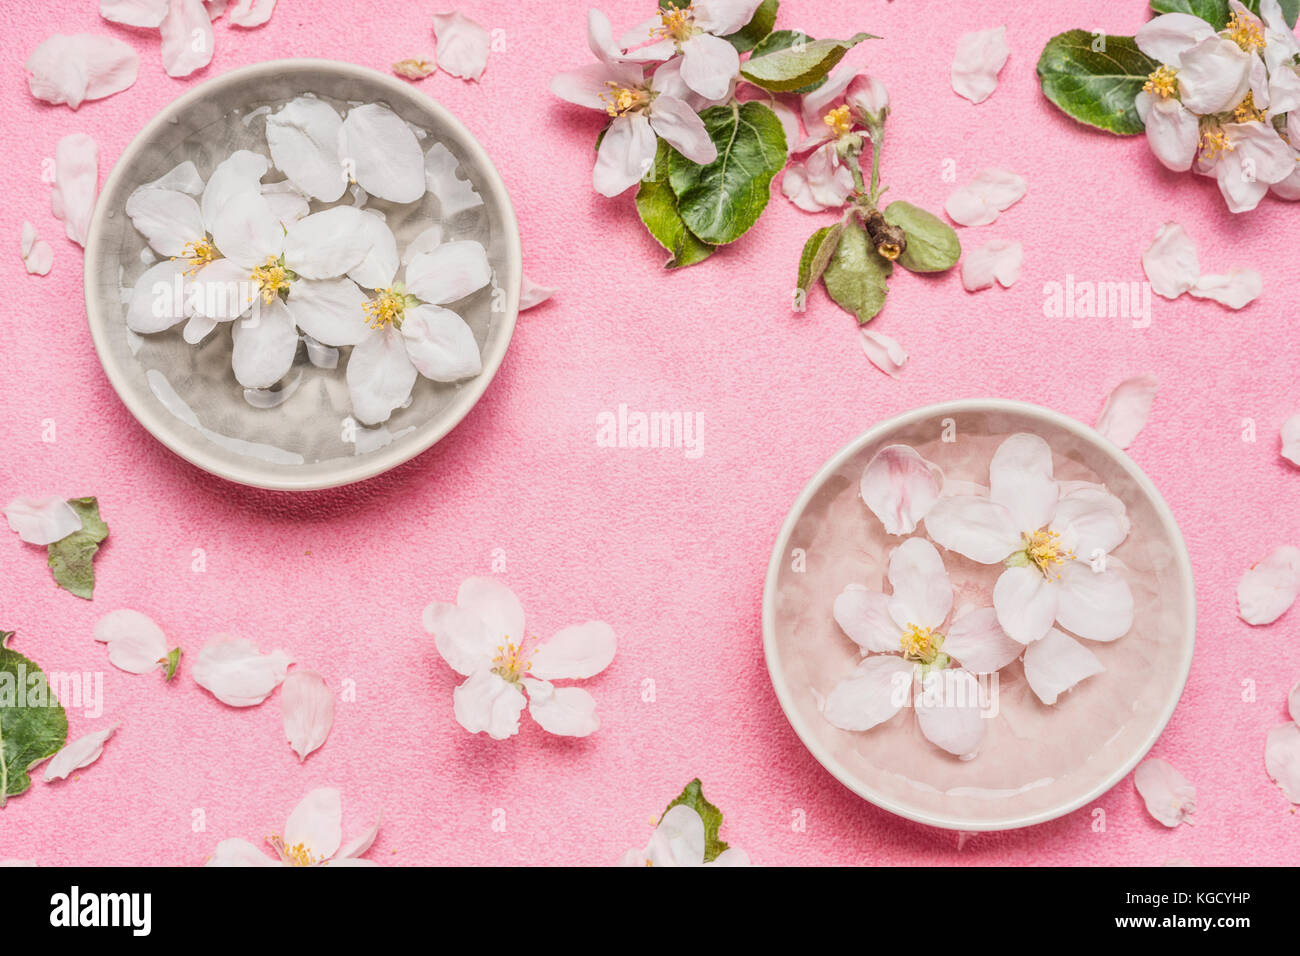 Spa or wellness pink background with blossom and water bowl with white flowers, top view. Spring blossom background Stock Photo